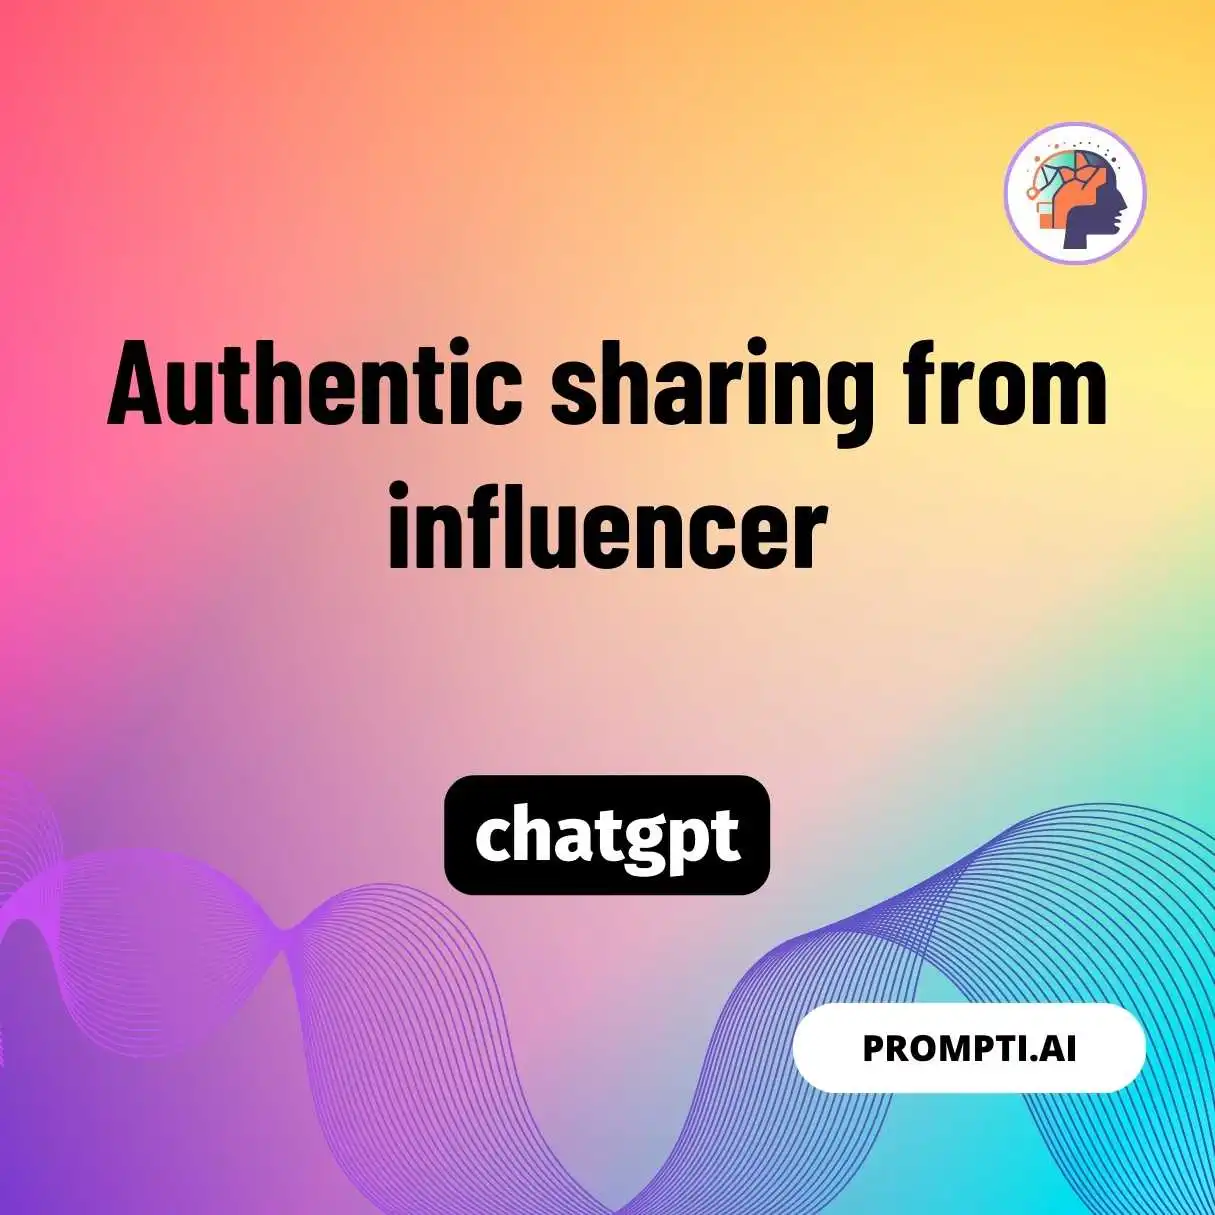 Authentic sharing from influencer